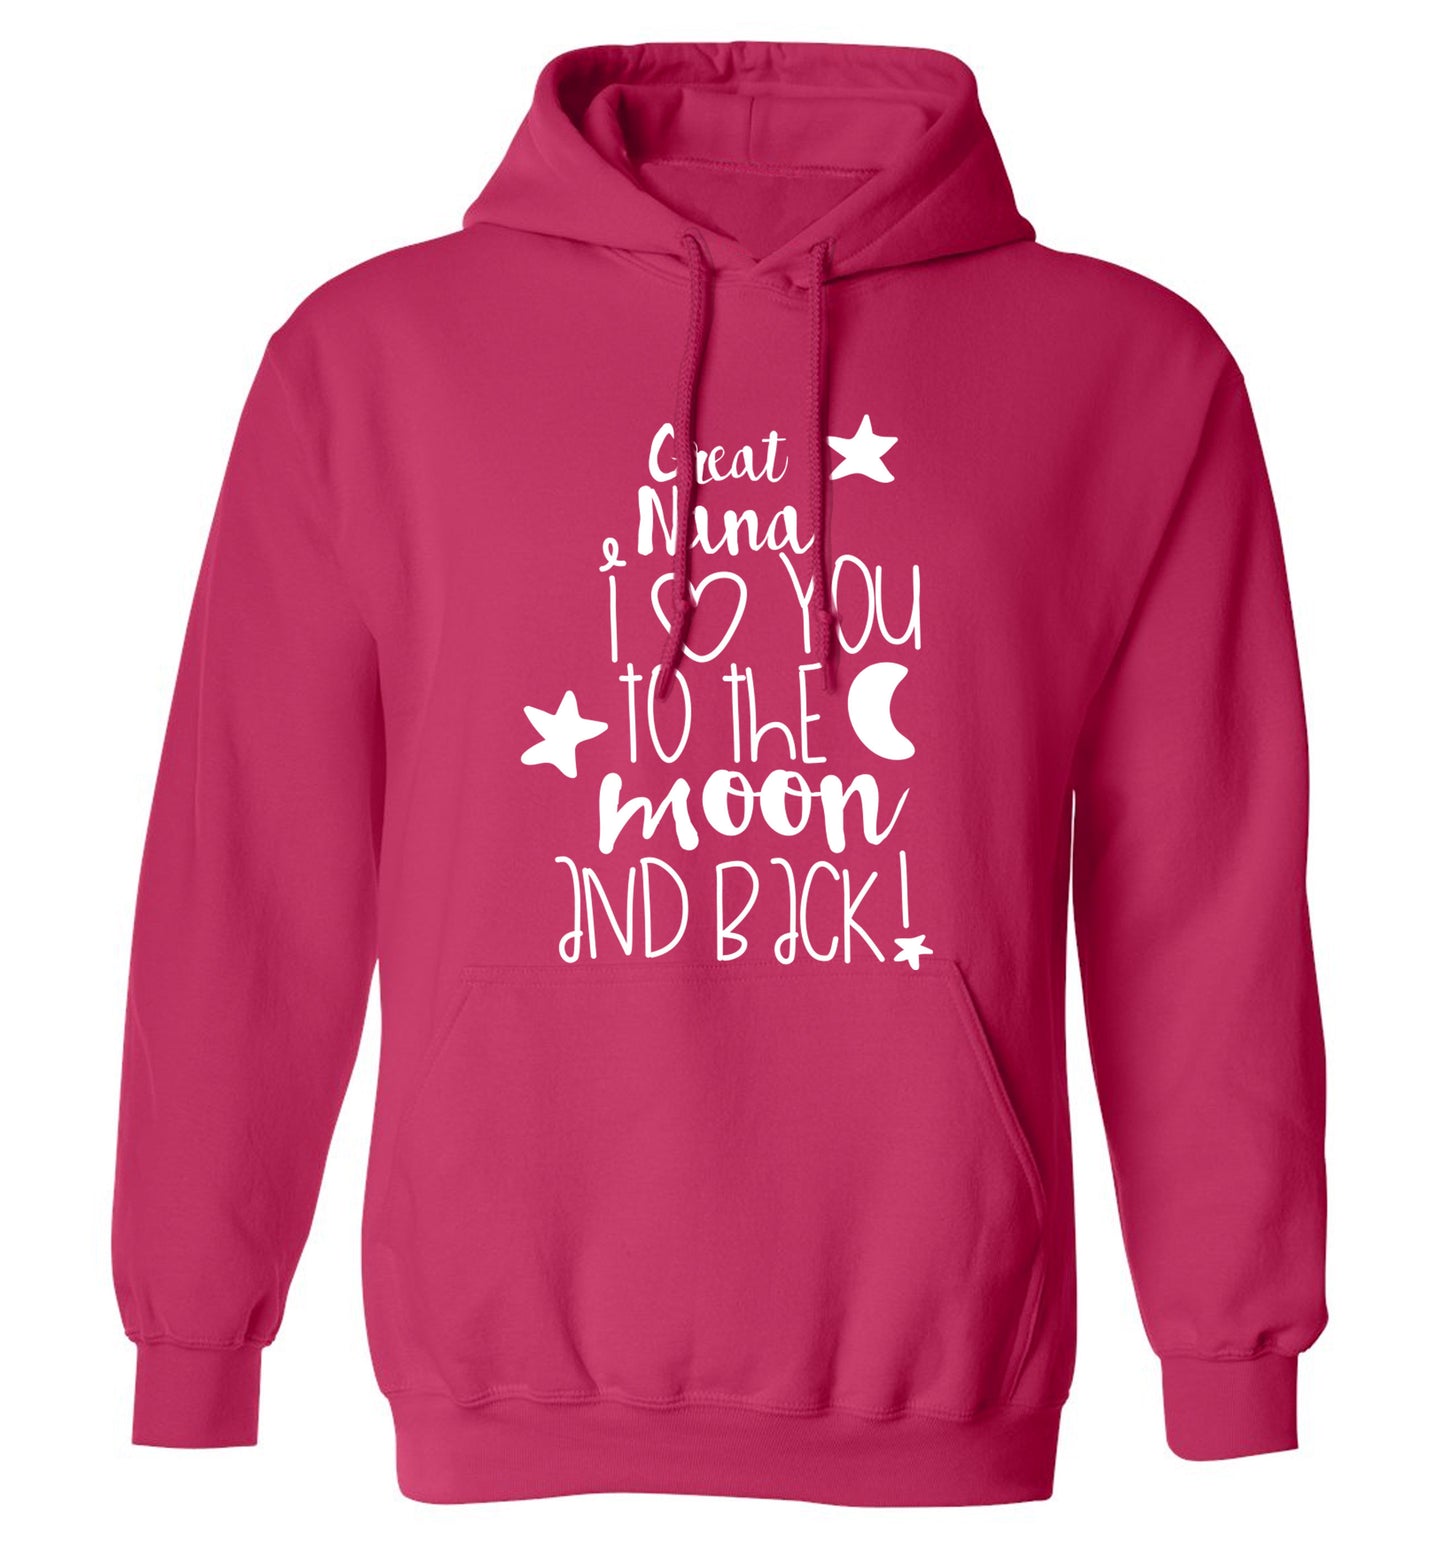 Great Nana I love you to the moon and back adults unisex pink hoodie 2XL